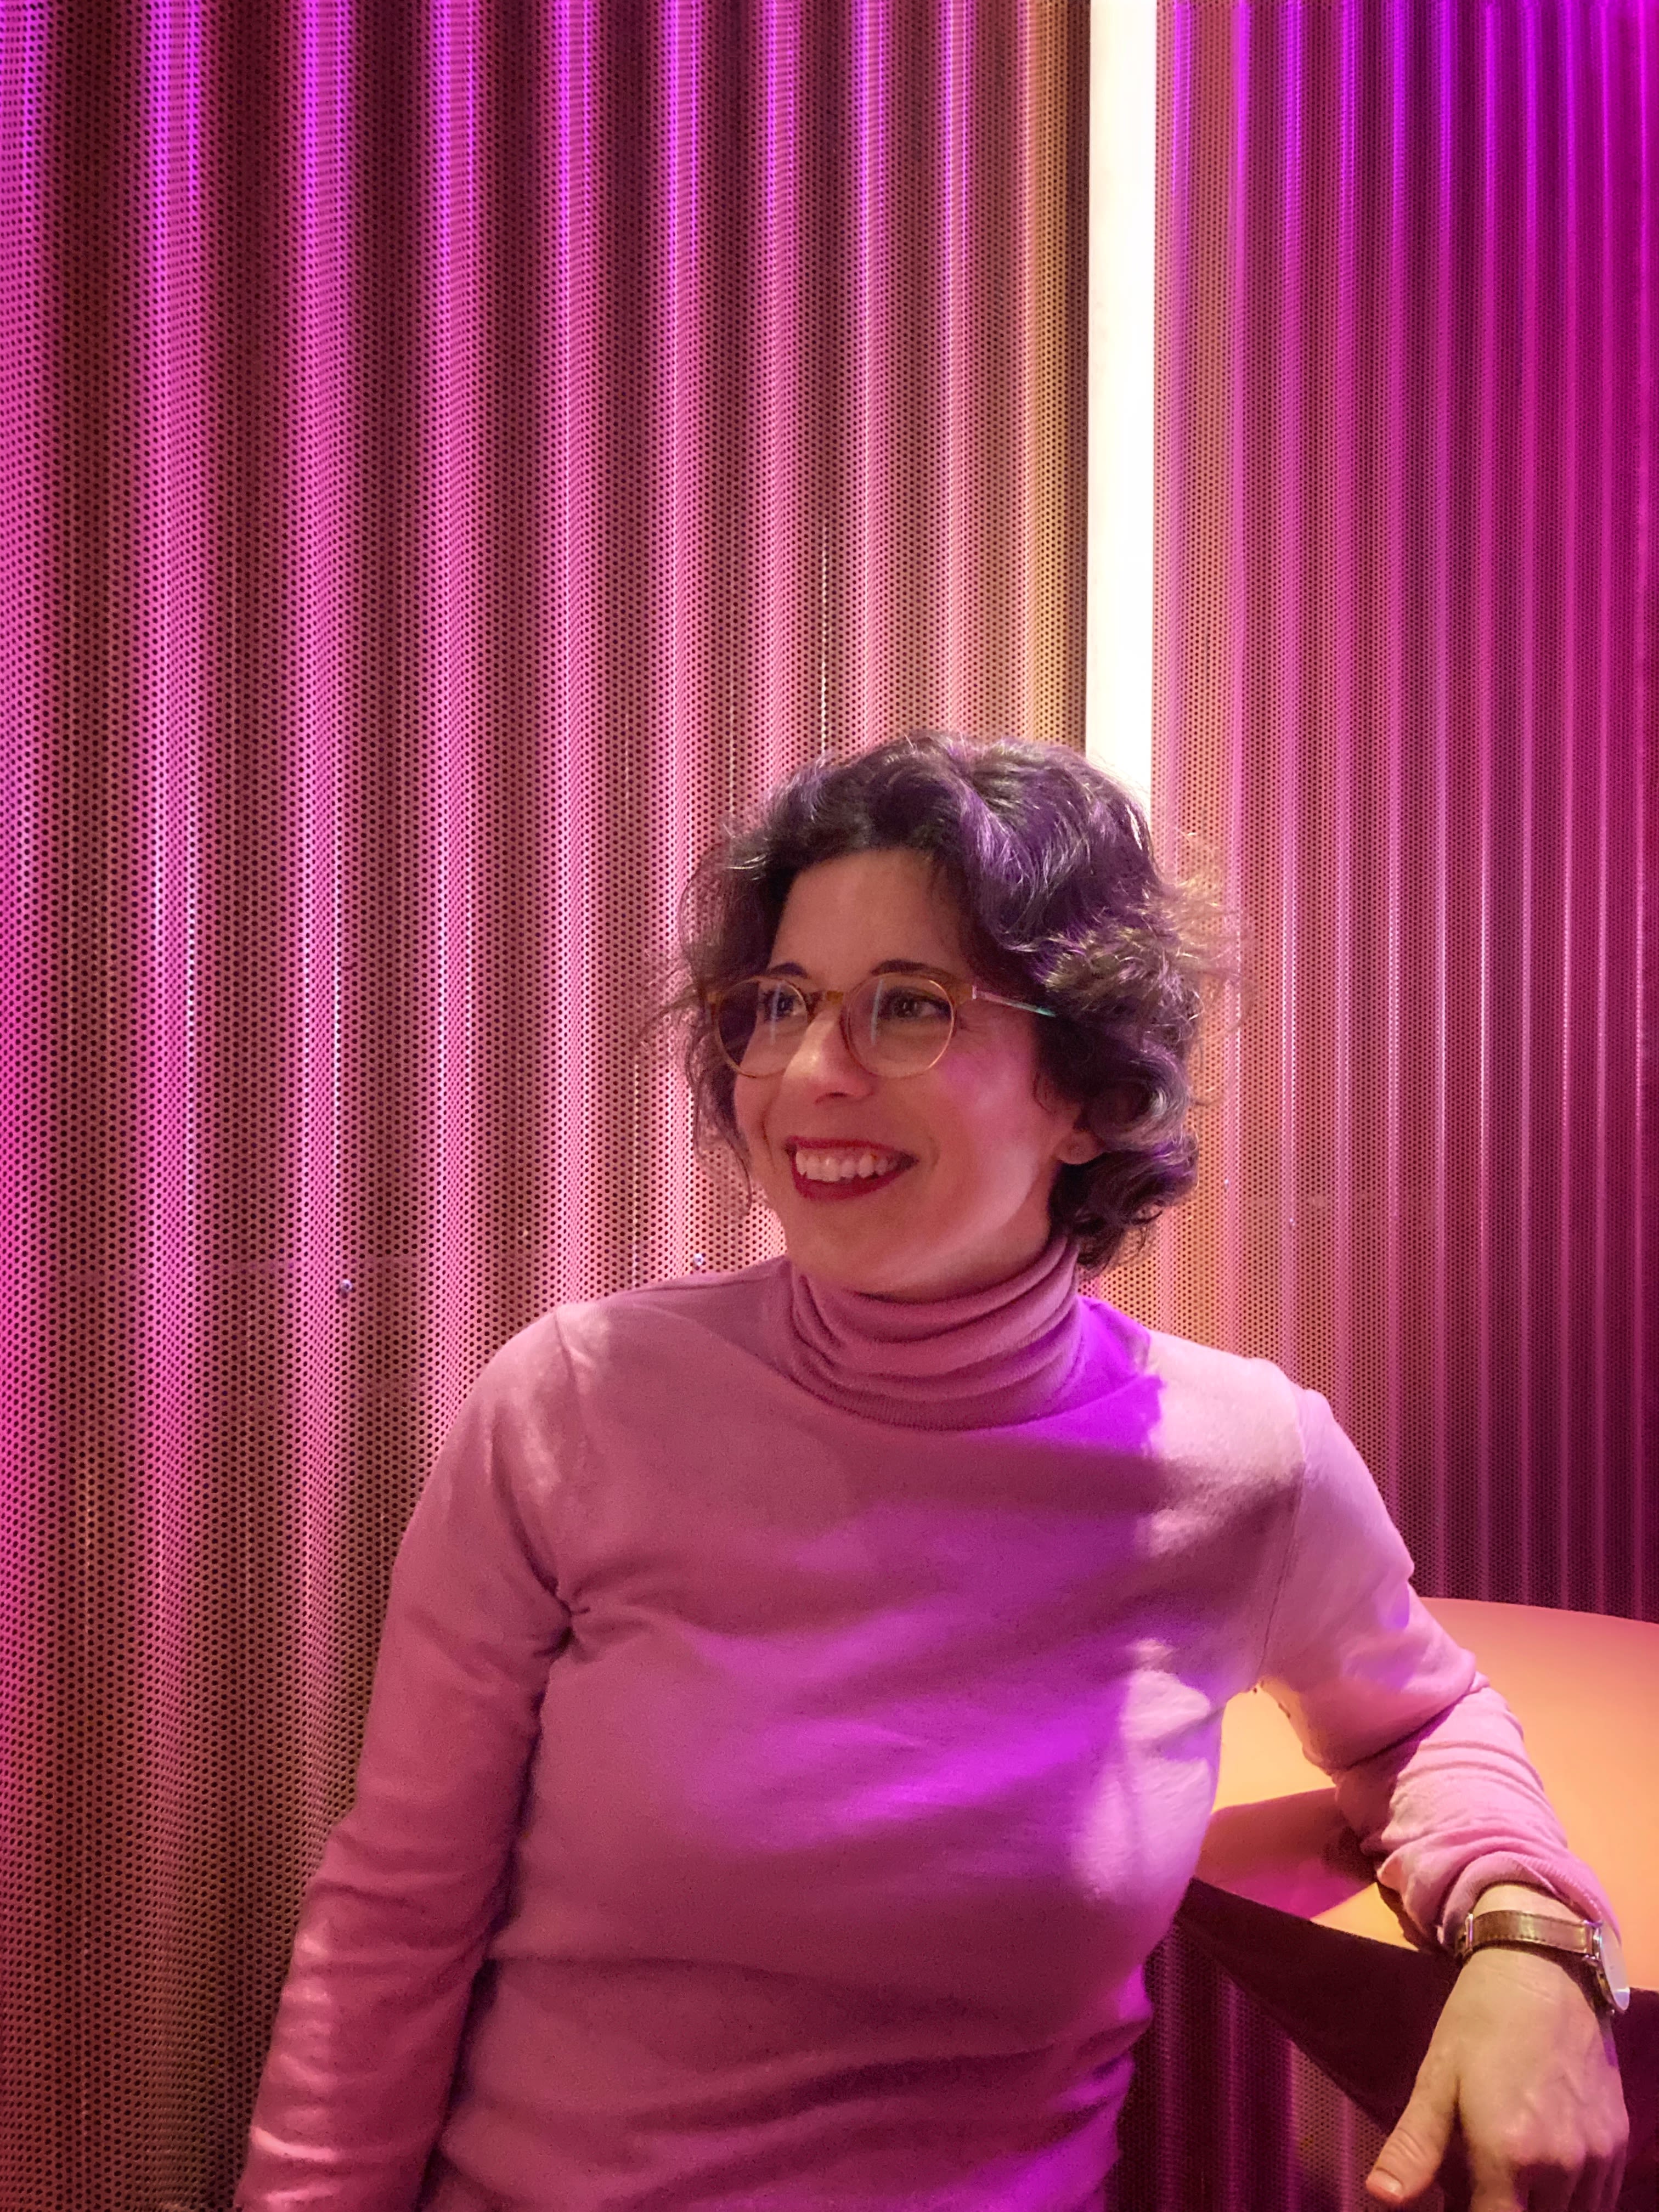 A white woman with short curly hair and glasses seated in front of some drapes. She is smiling and looking to her left.